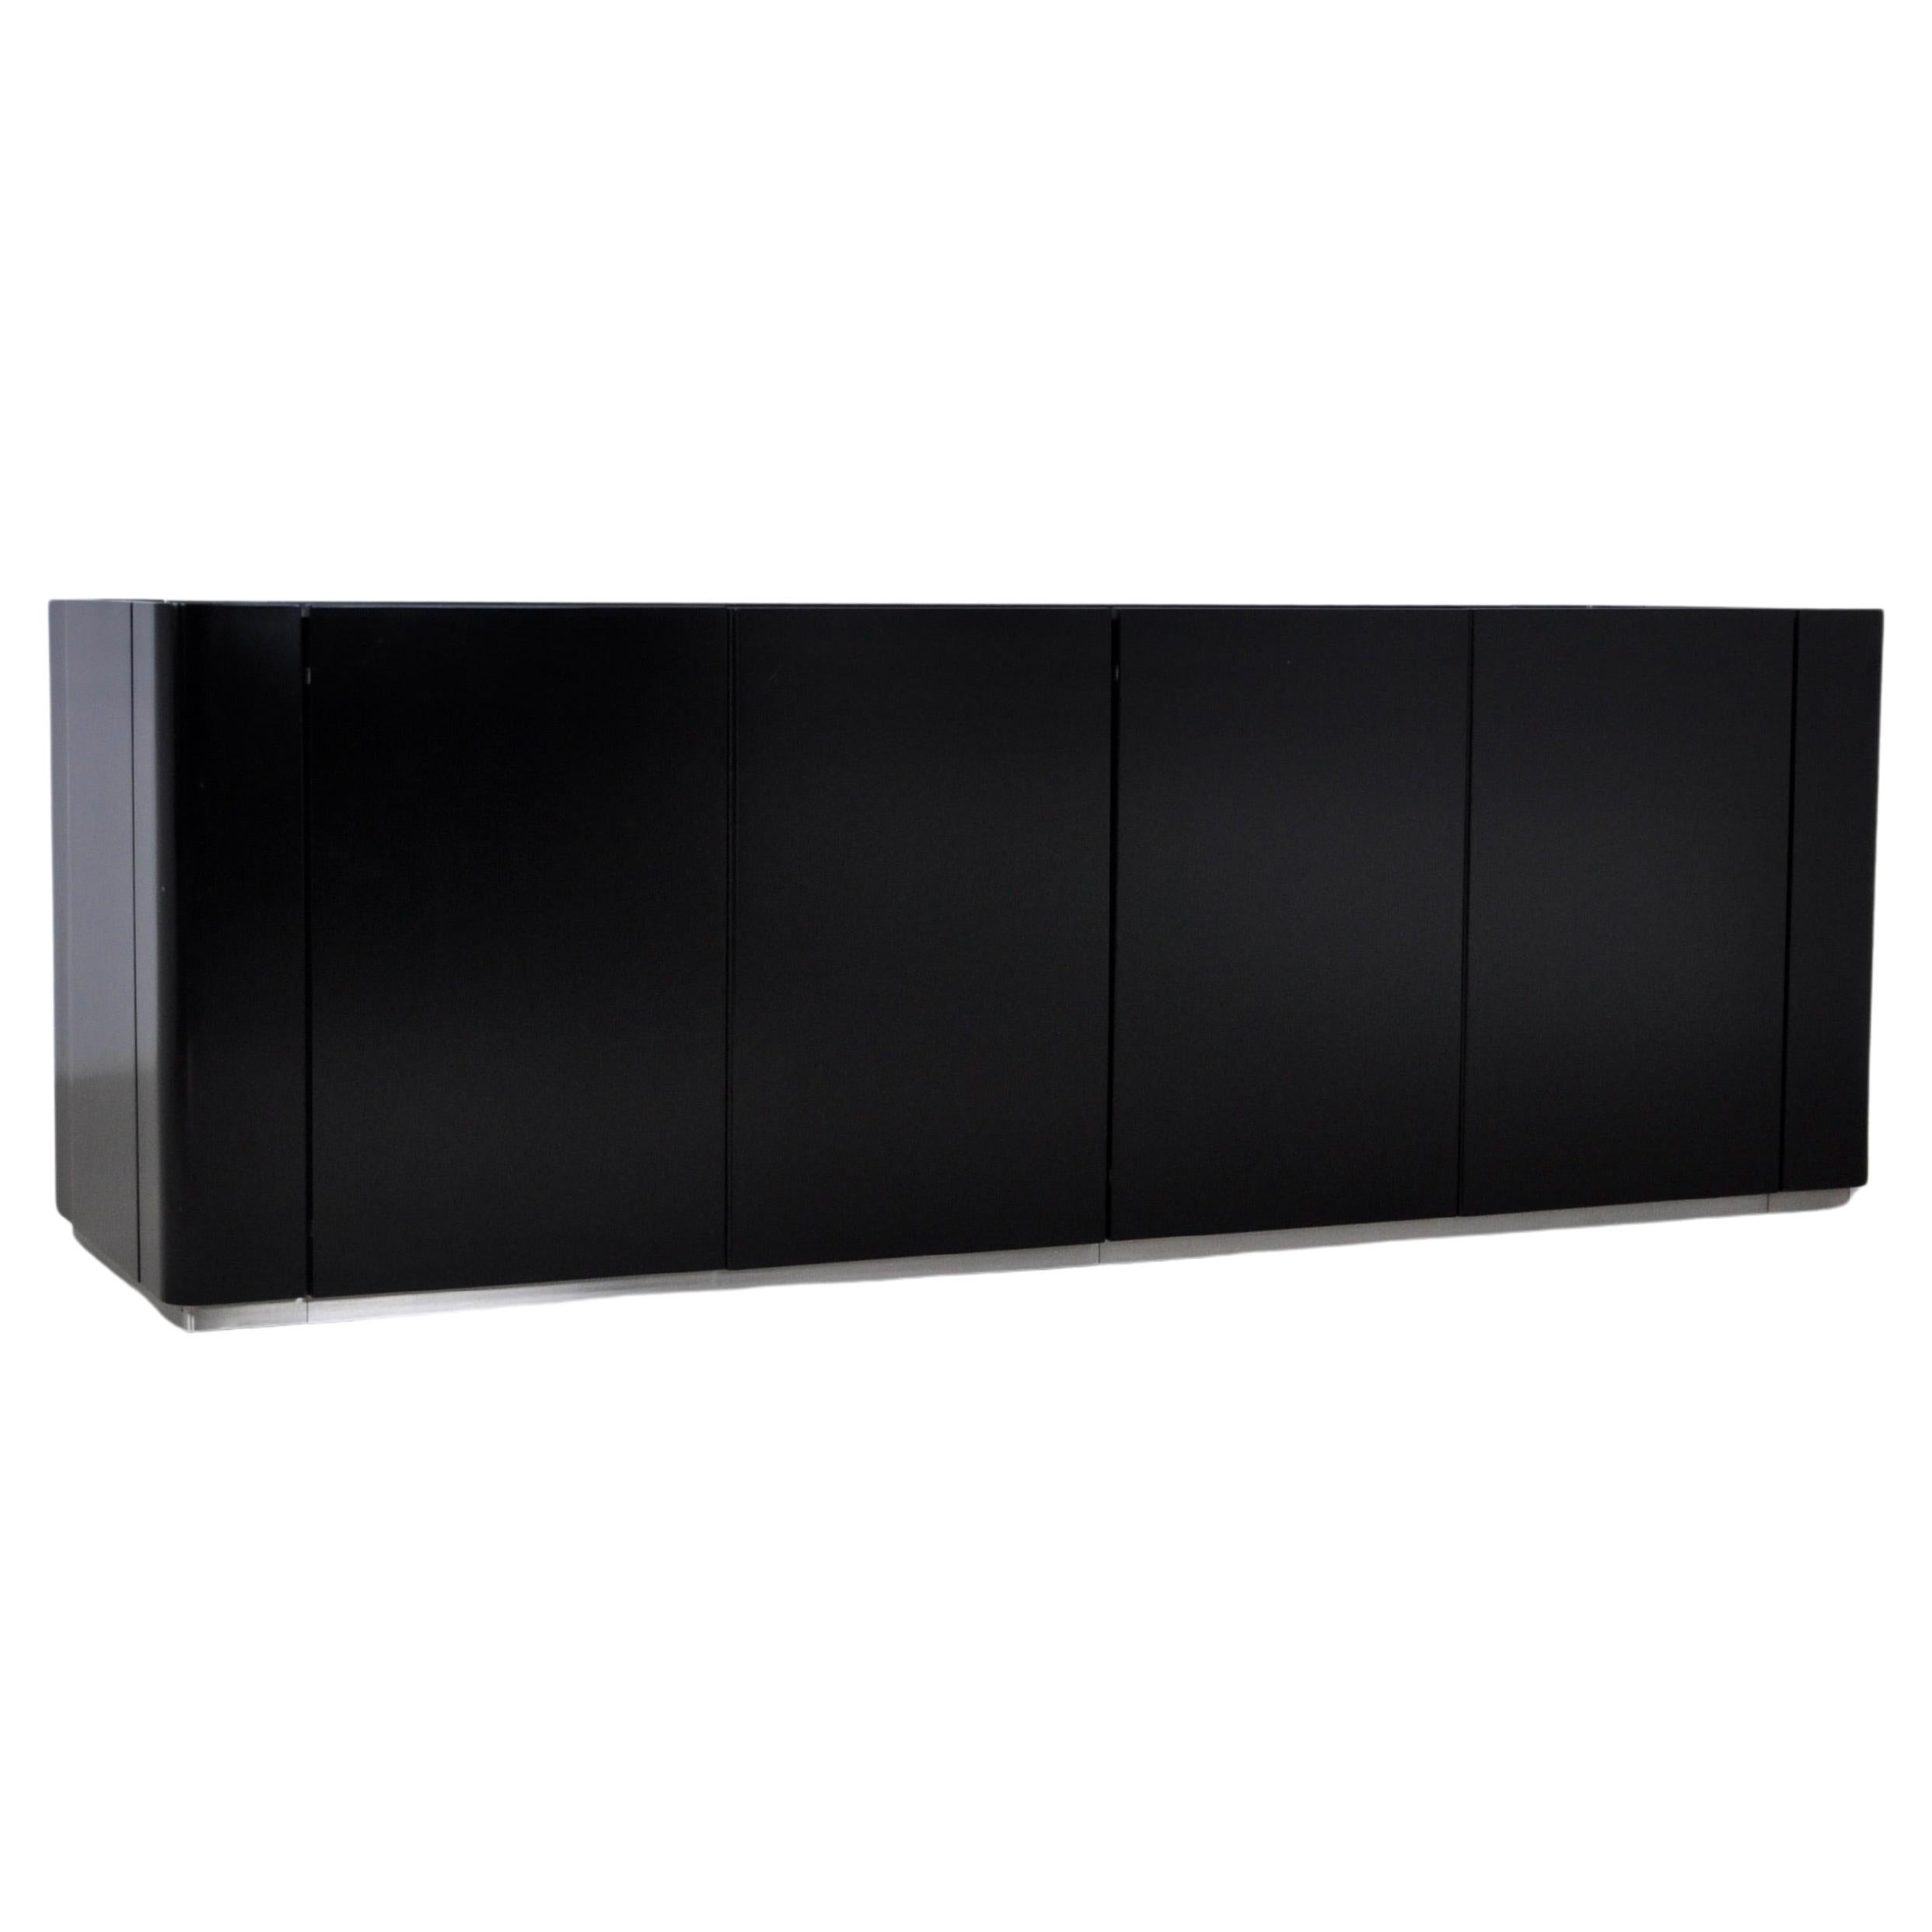 Black wooden sideboard with a mirror on top and a metal bar on the bottom. 4 doors with two drawers and two shelves inside. Wear due to time and age of the sideboard.